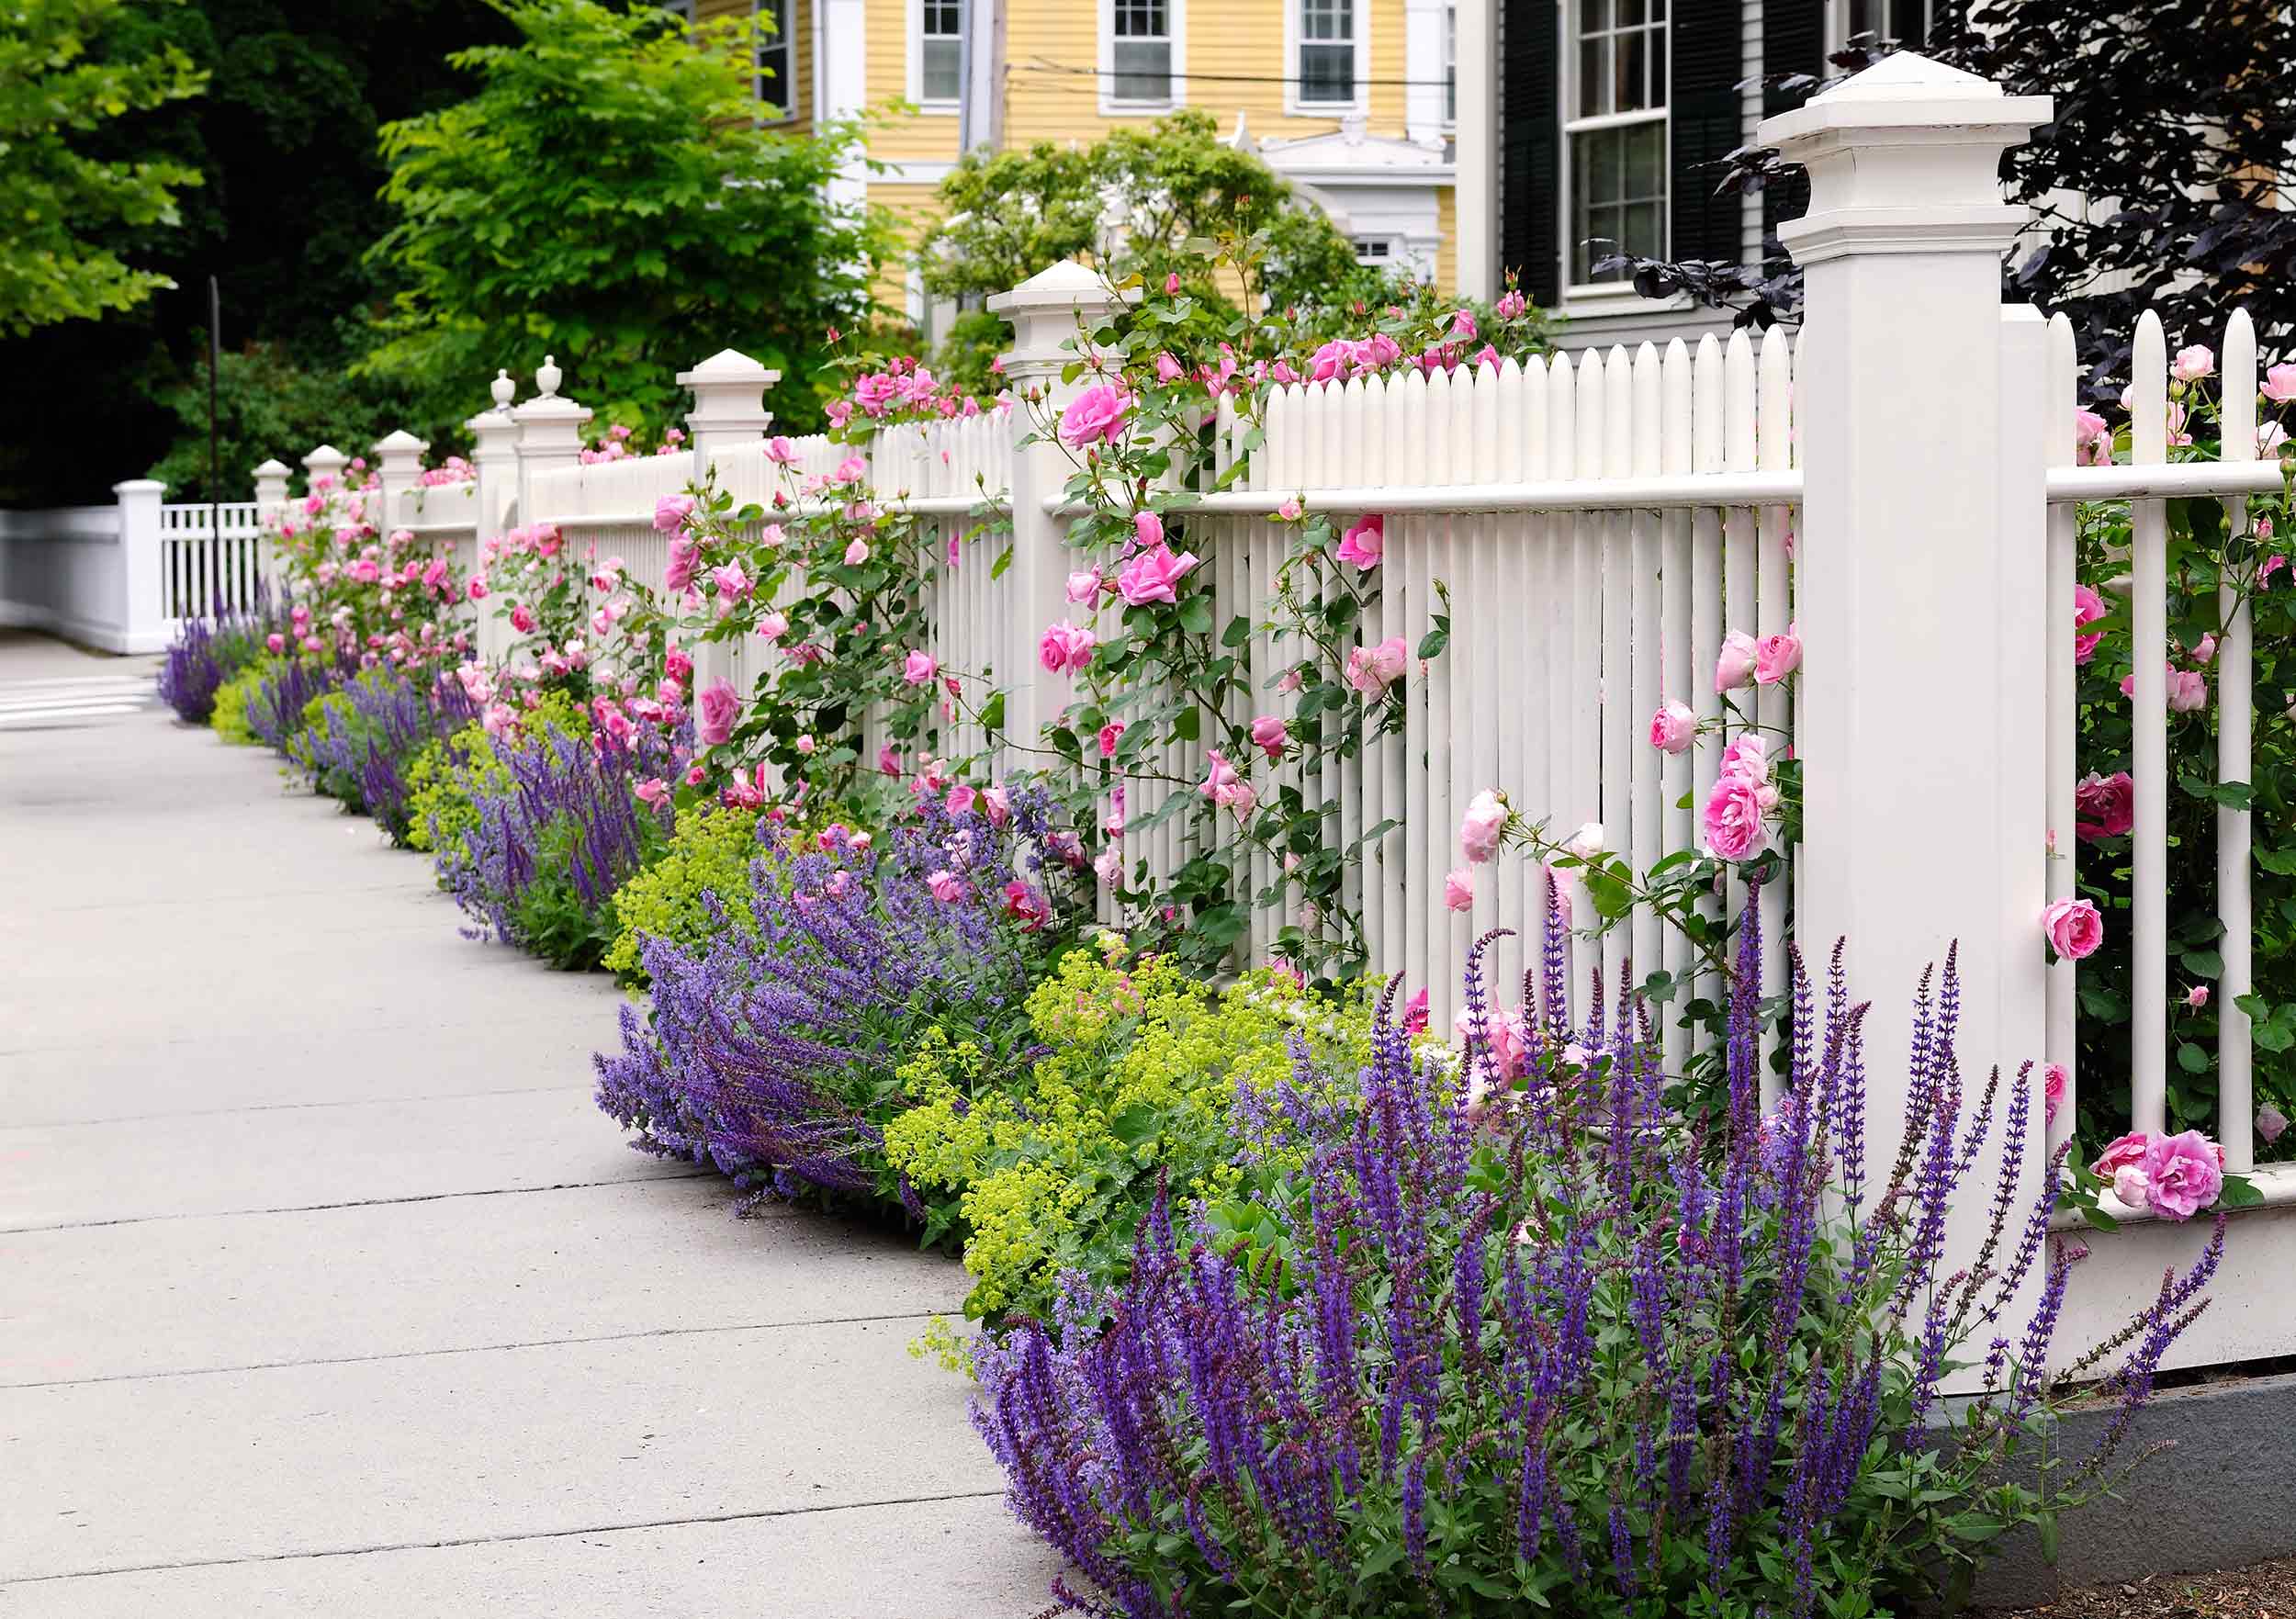 Landscaping - Fencing with mature flowers.